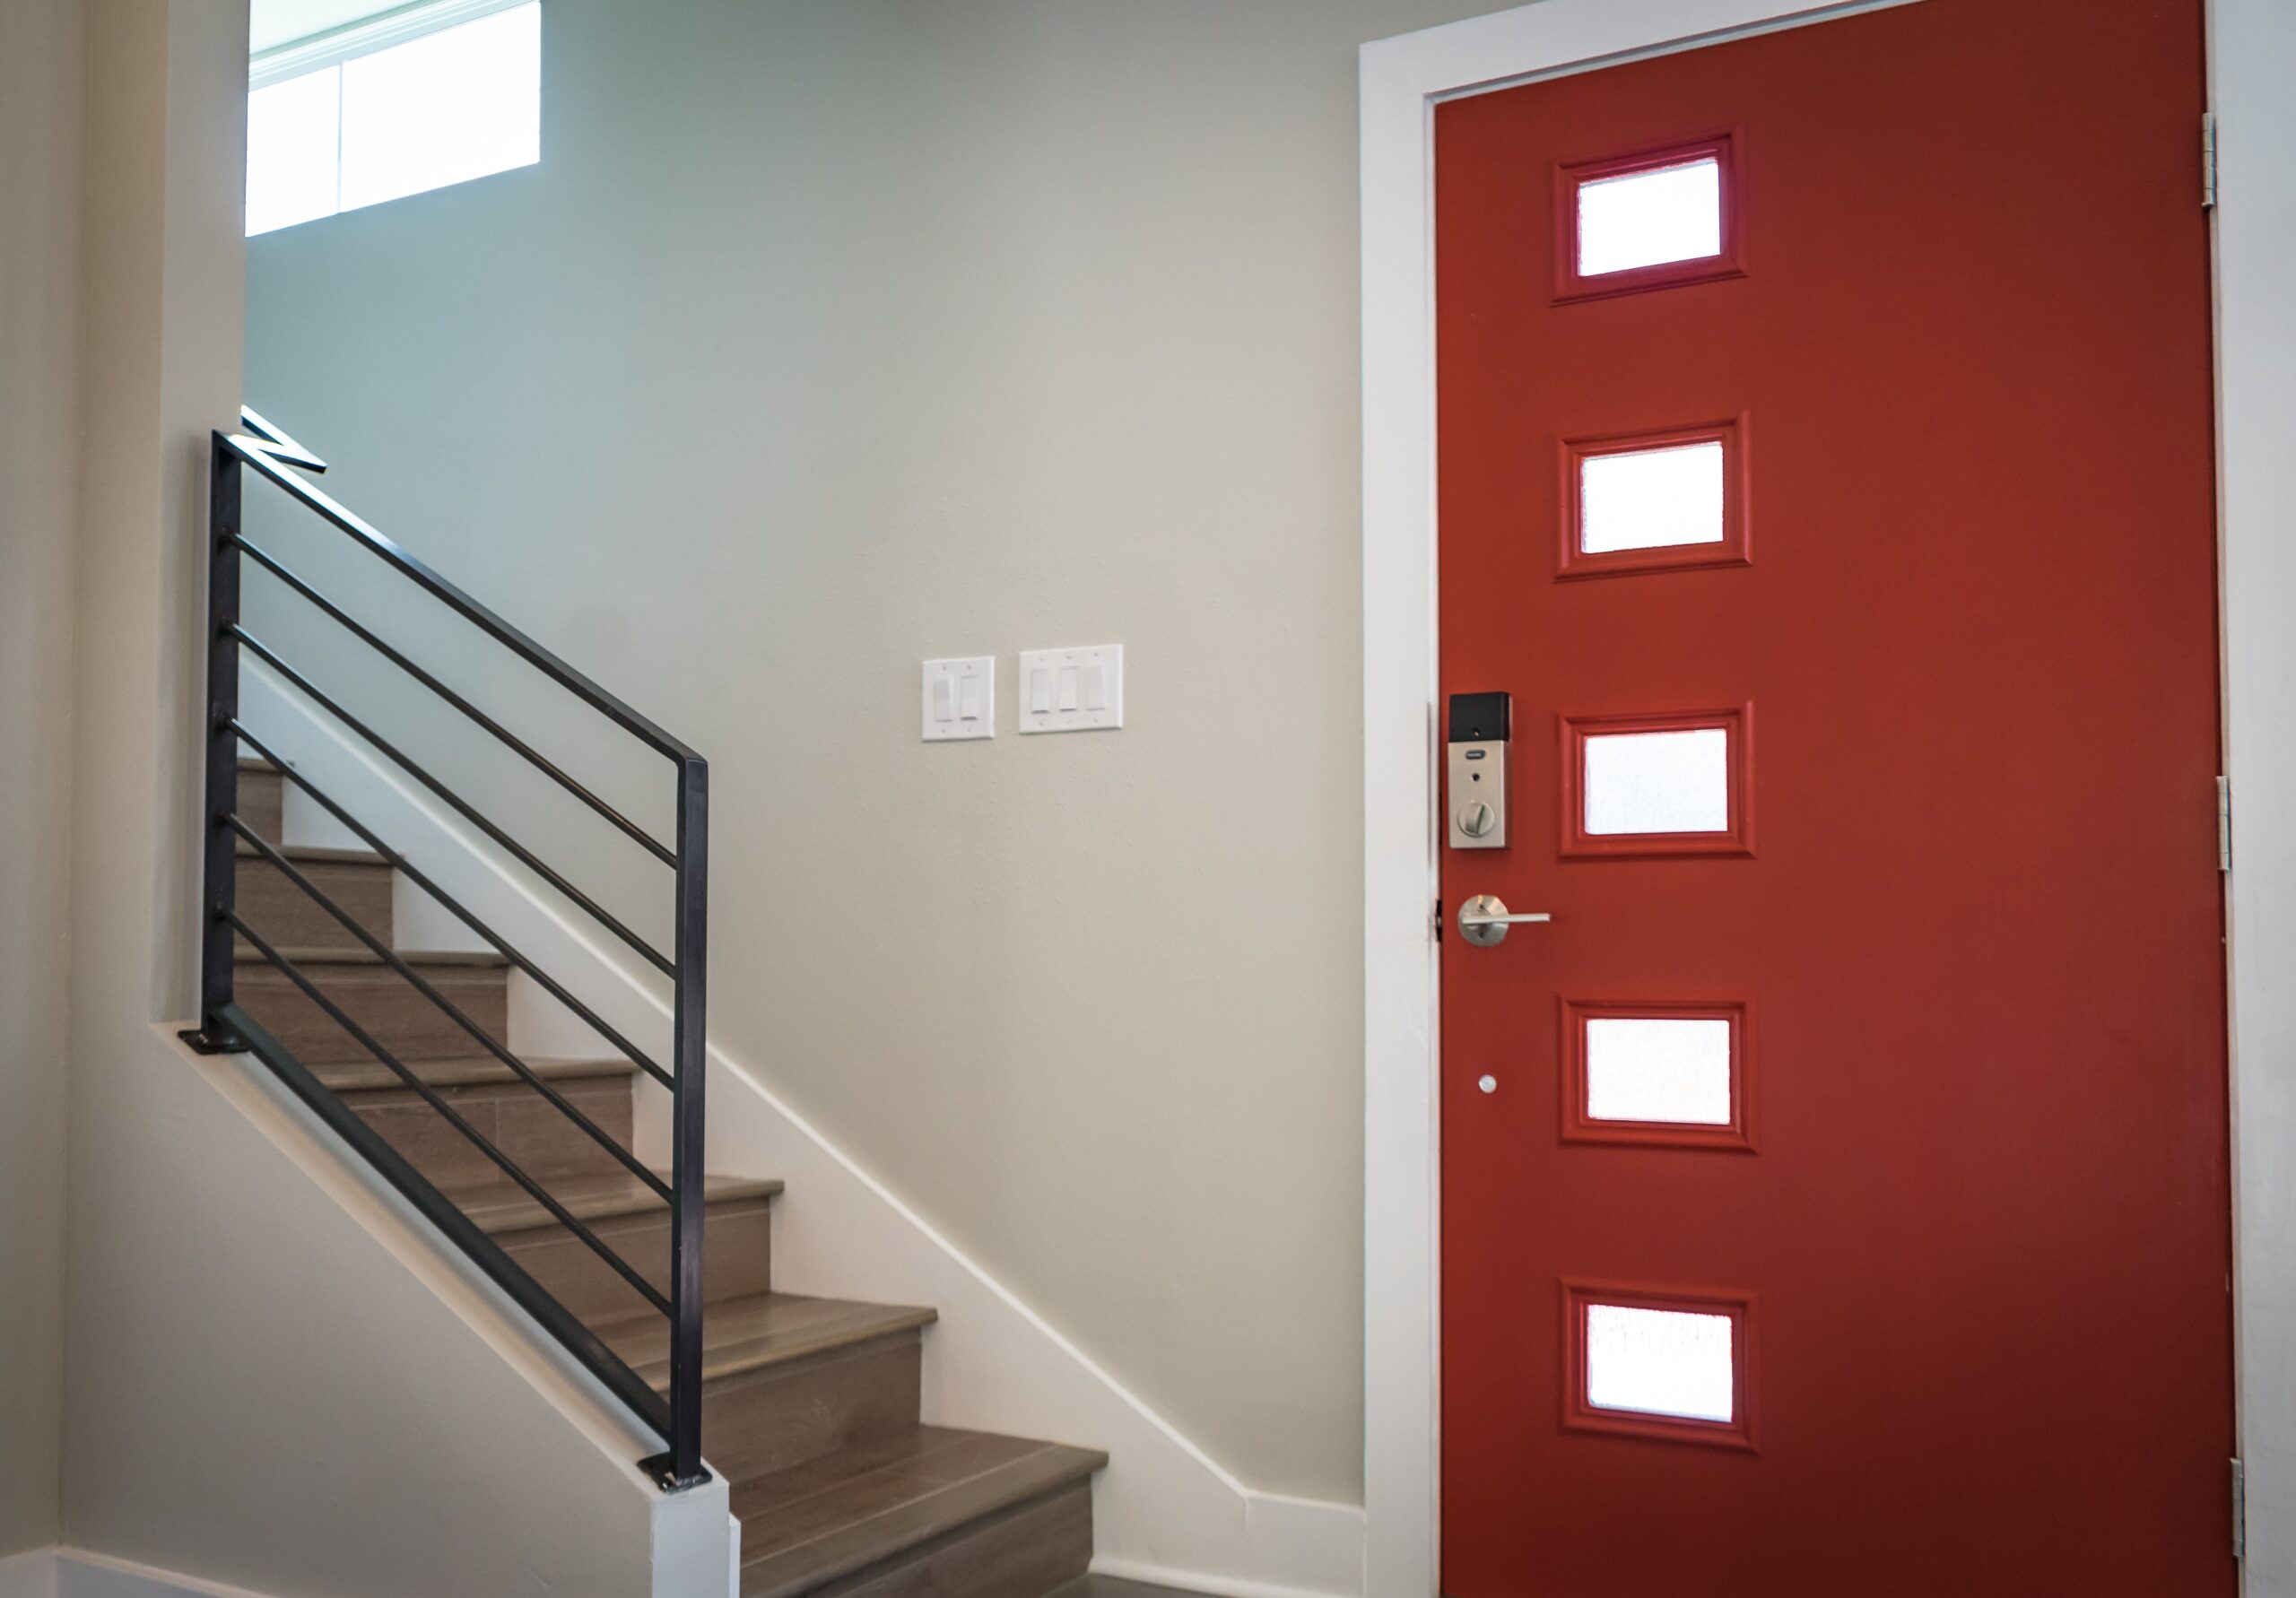 An entryway in a home features a bold red door and a stairway to the left.